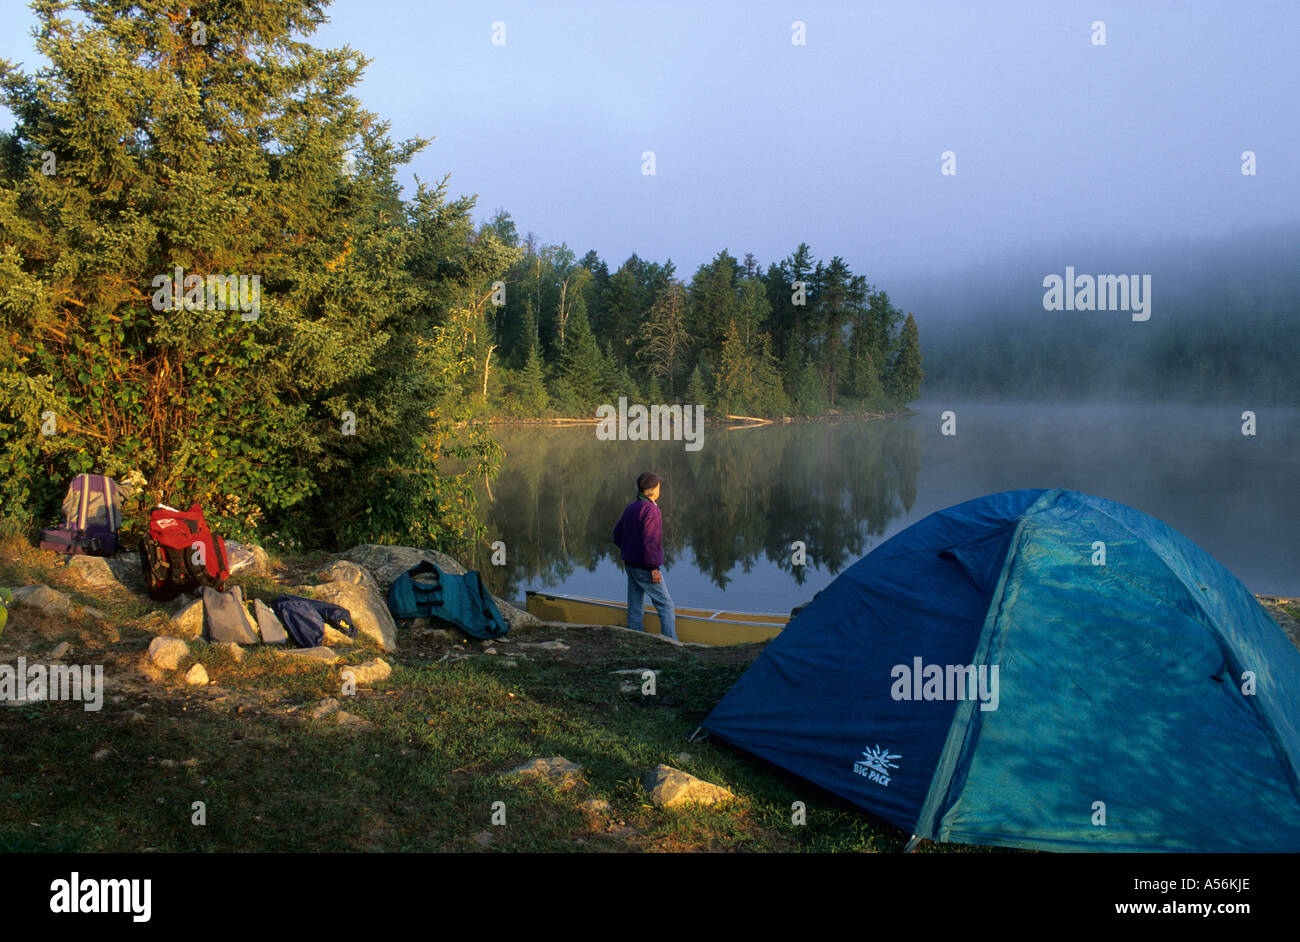 Str MR04 Striglsen, camp at a lake in the Boundary Waters Canoe Area, Minnesota, USA Stock Photo